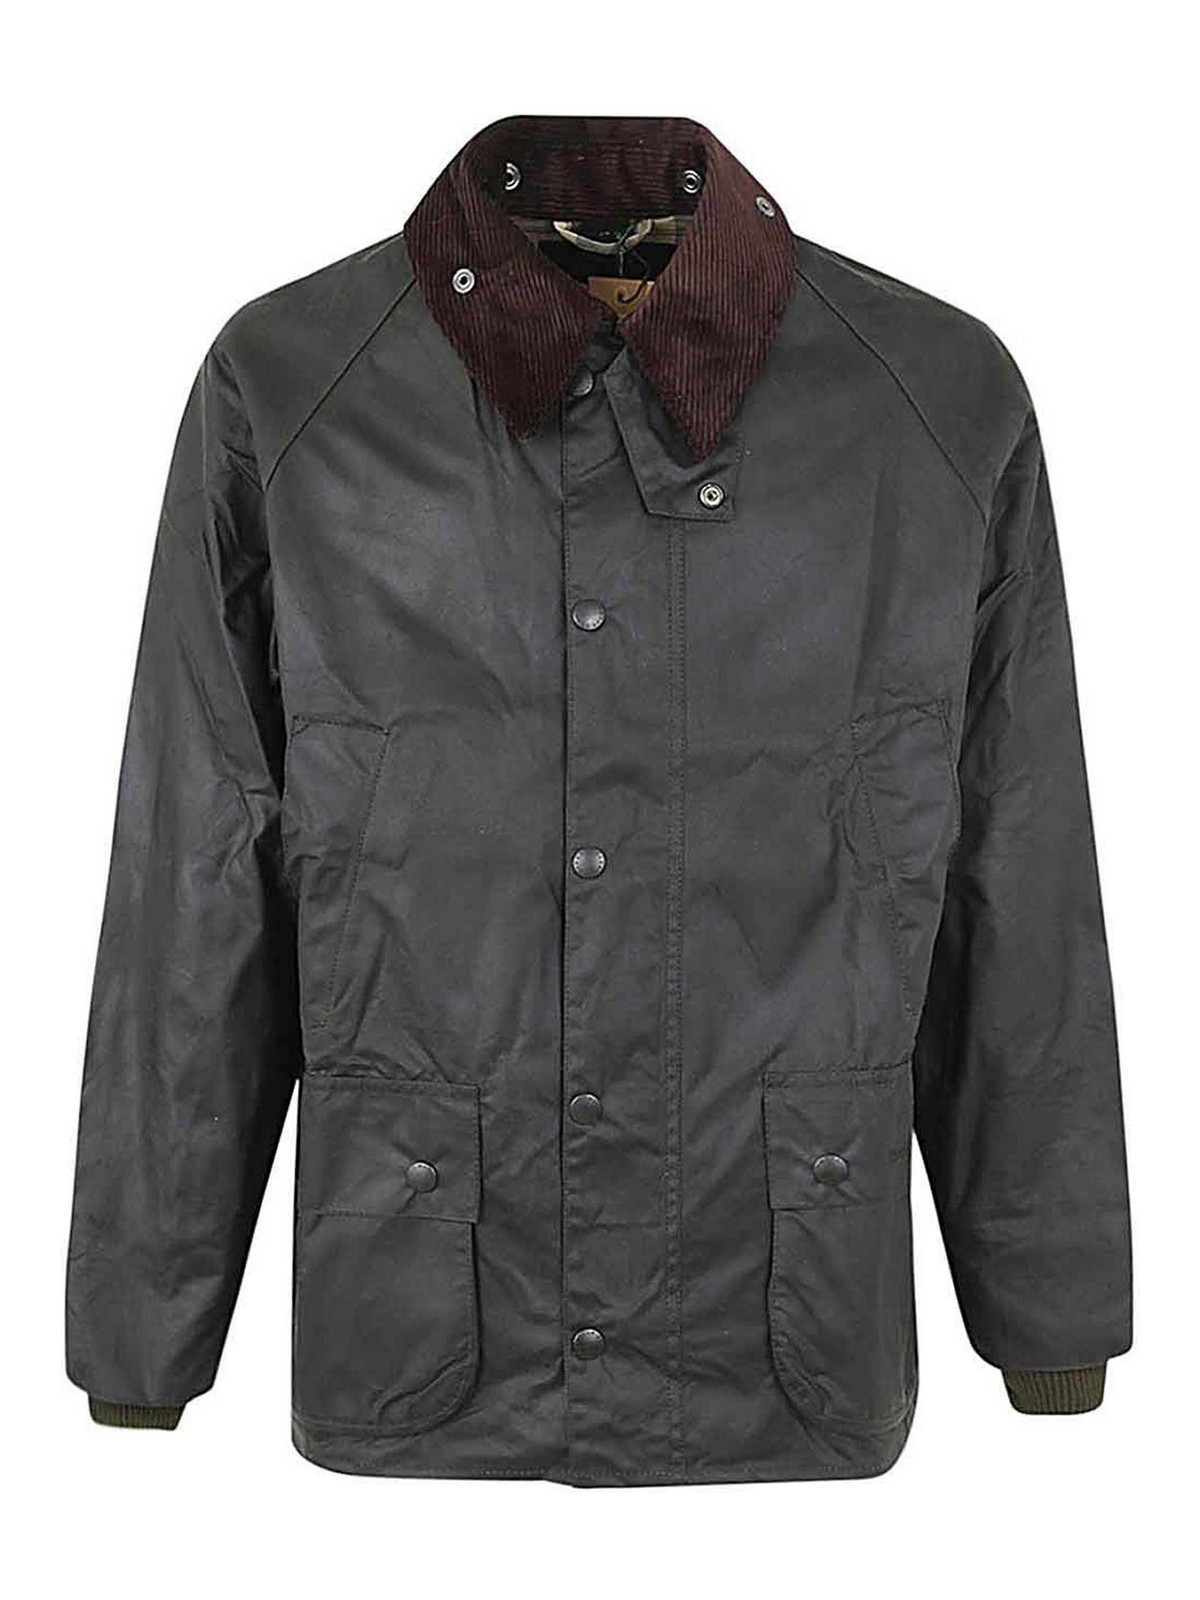 Casual jackets Barbour - Bedale wax jacket - MWX0018SG91 | thebs.com